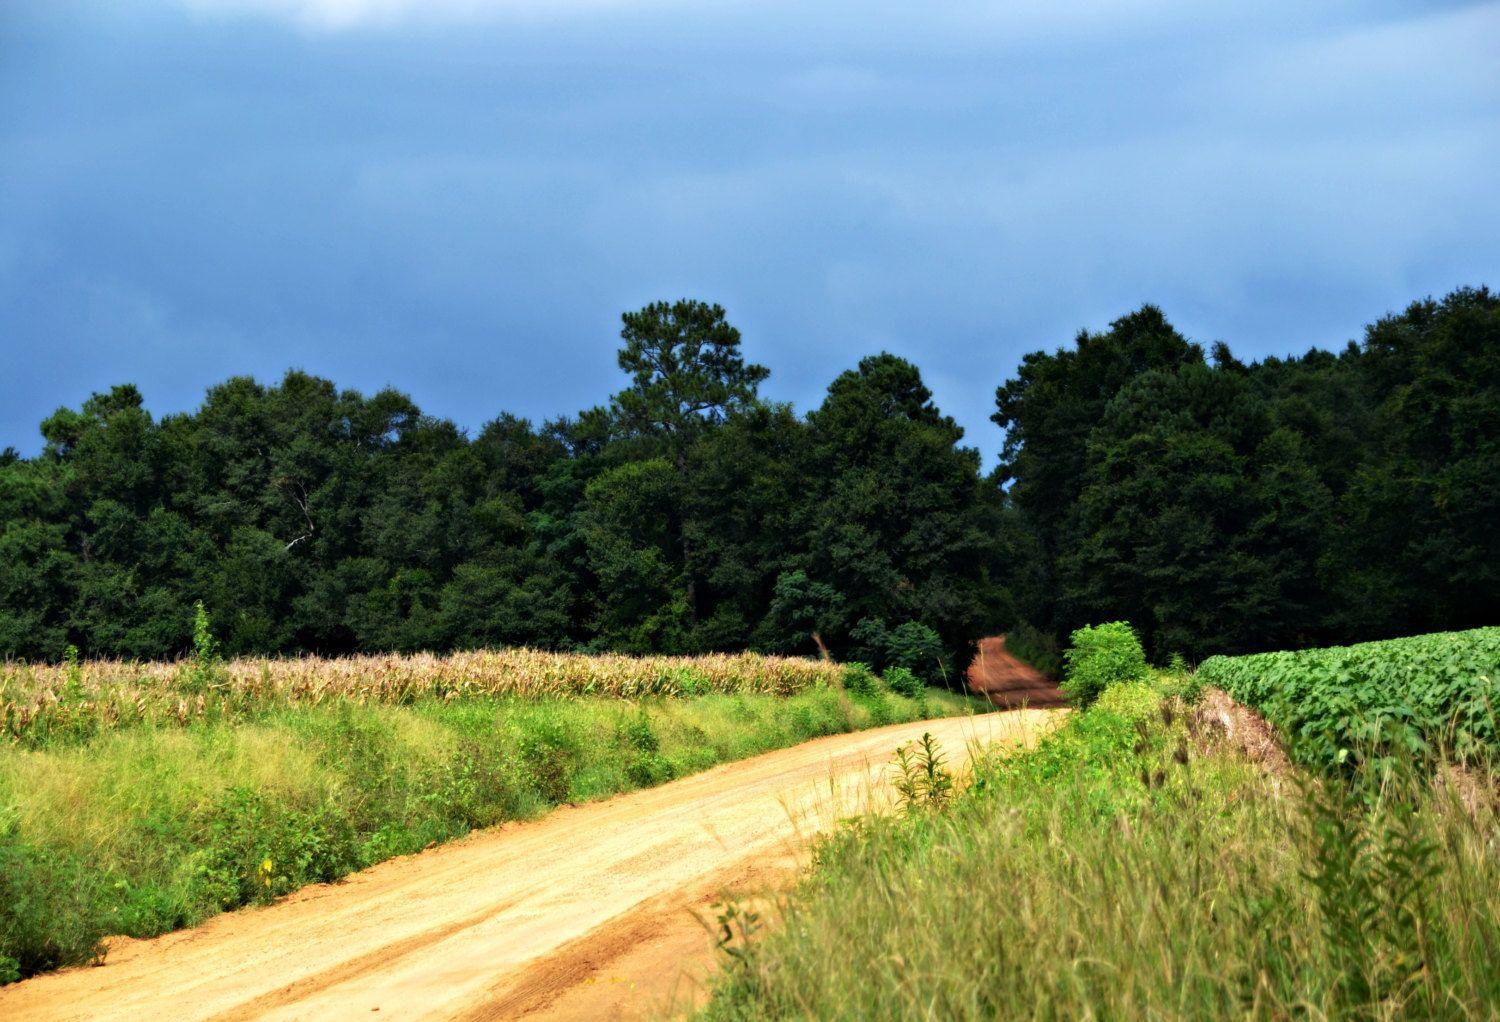 Instant Download Storm Clouds over Dirt Road Picture or